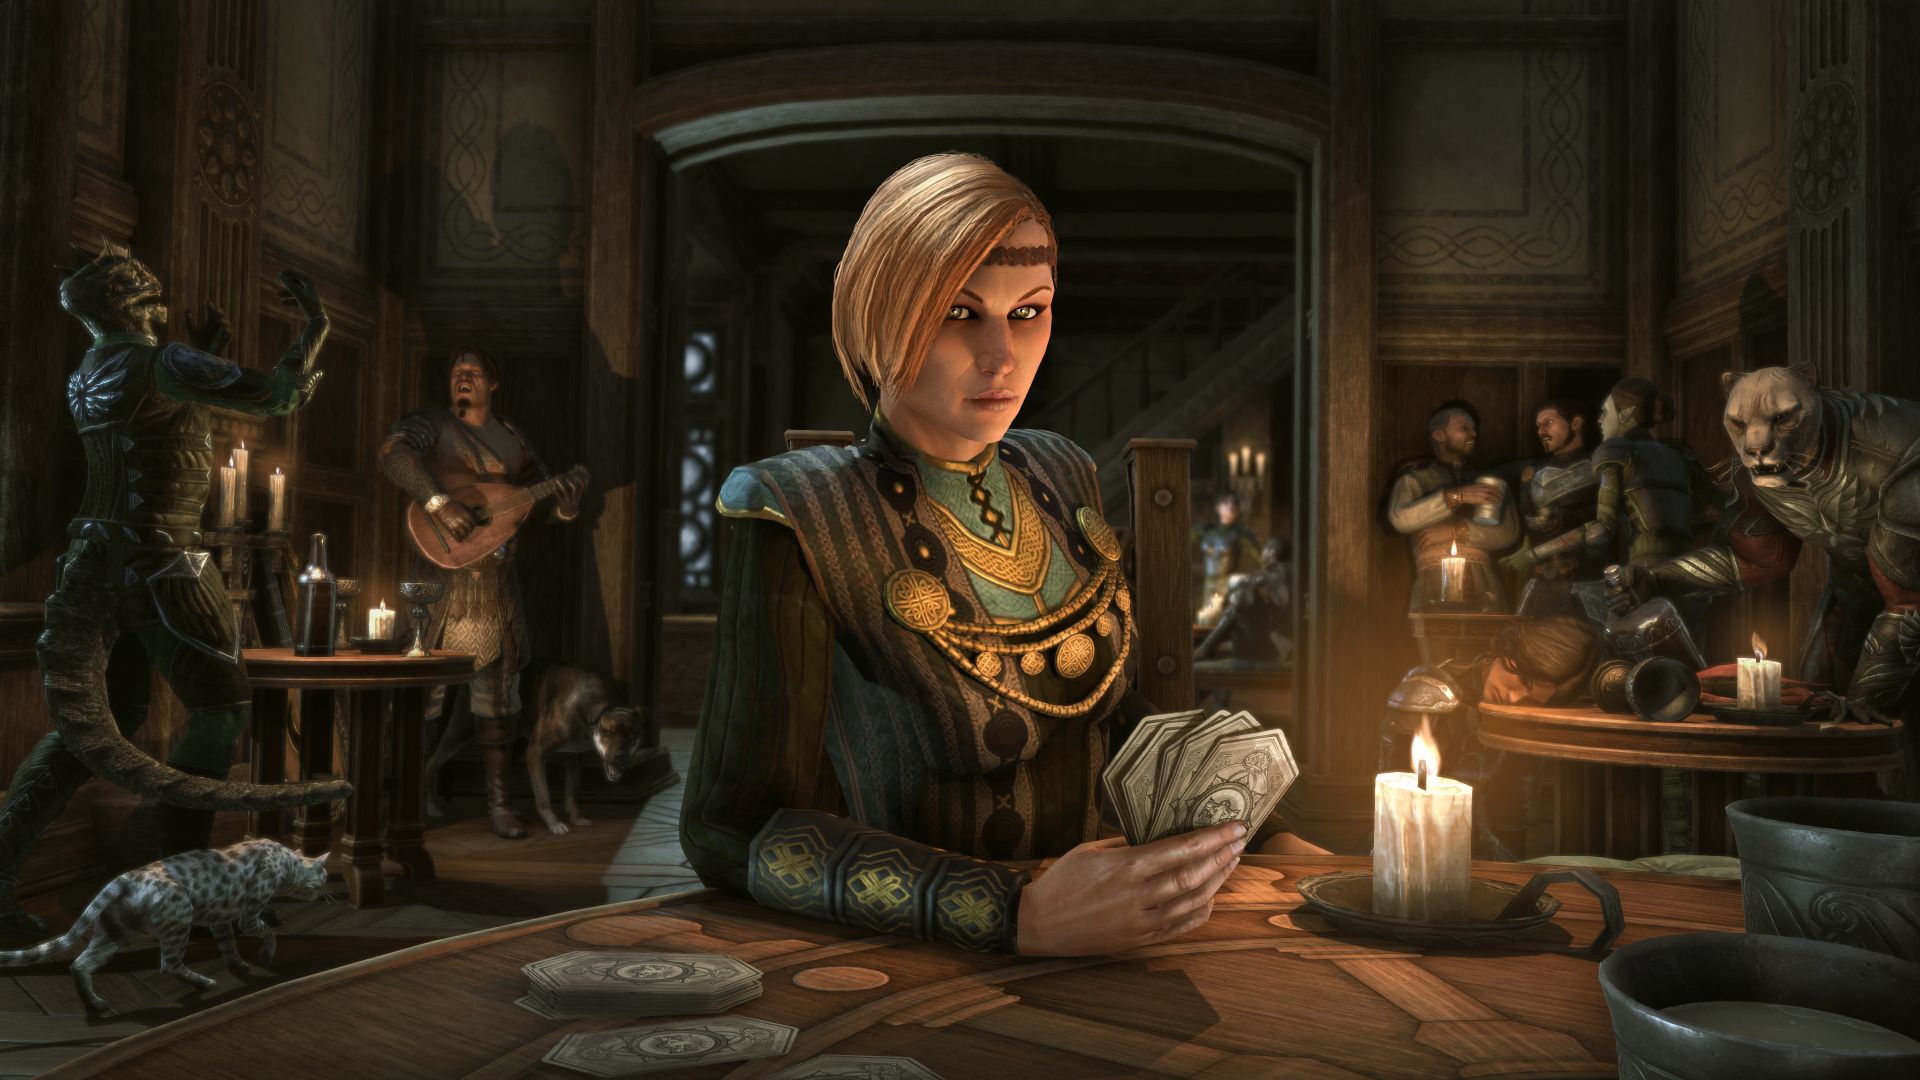 The Elder Scrolls Online is getting a card game minigame